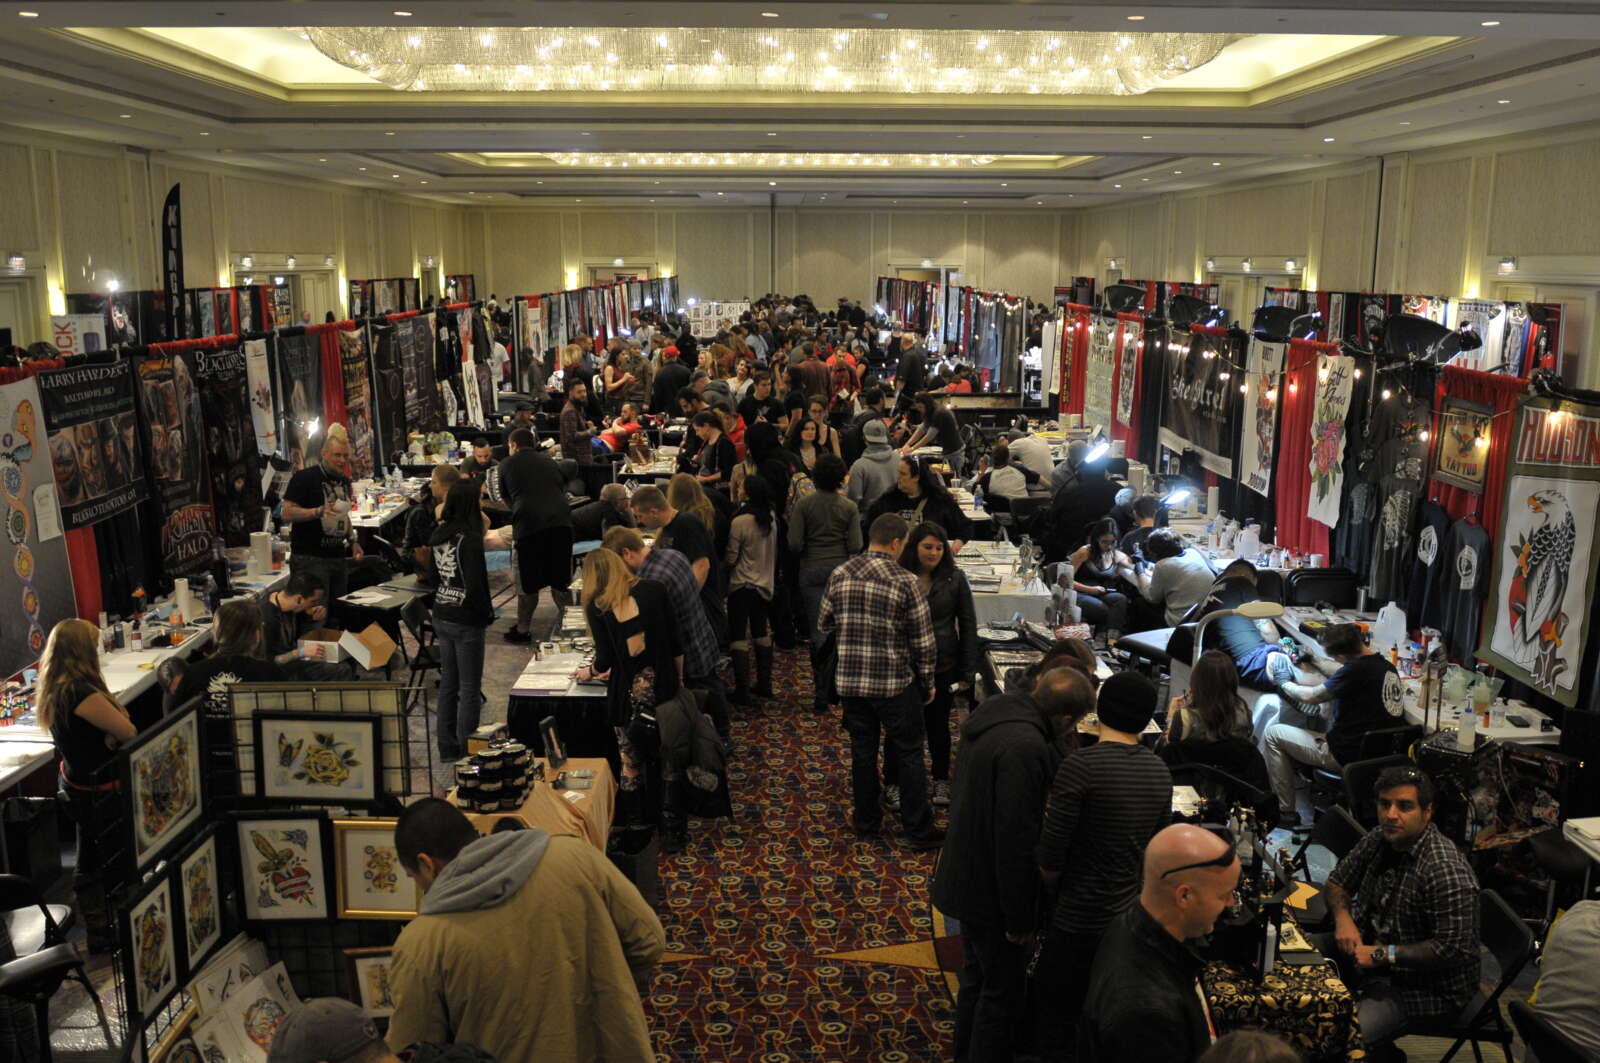 DC Tattoo Expo coming to Arlington this weekend